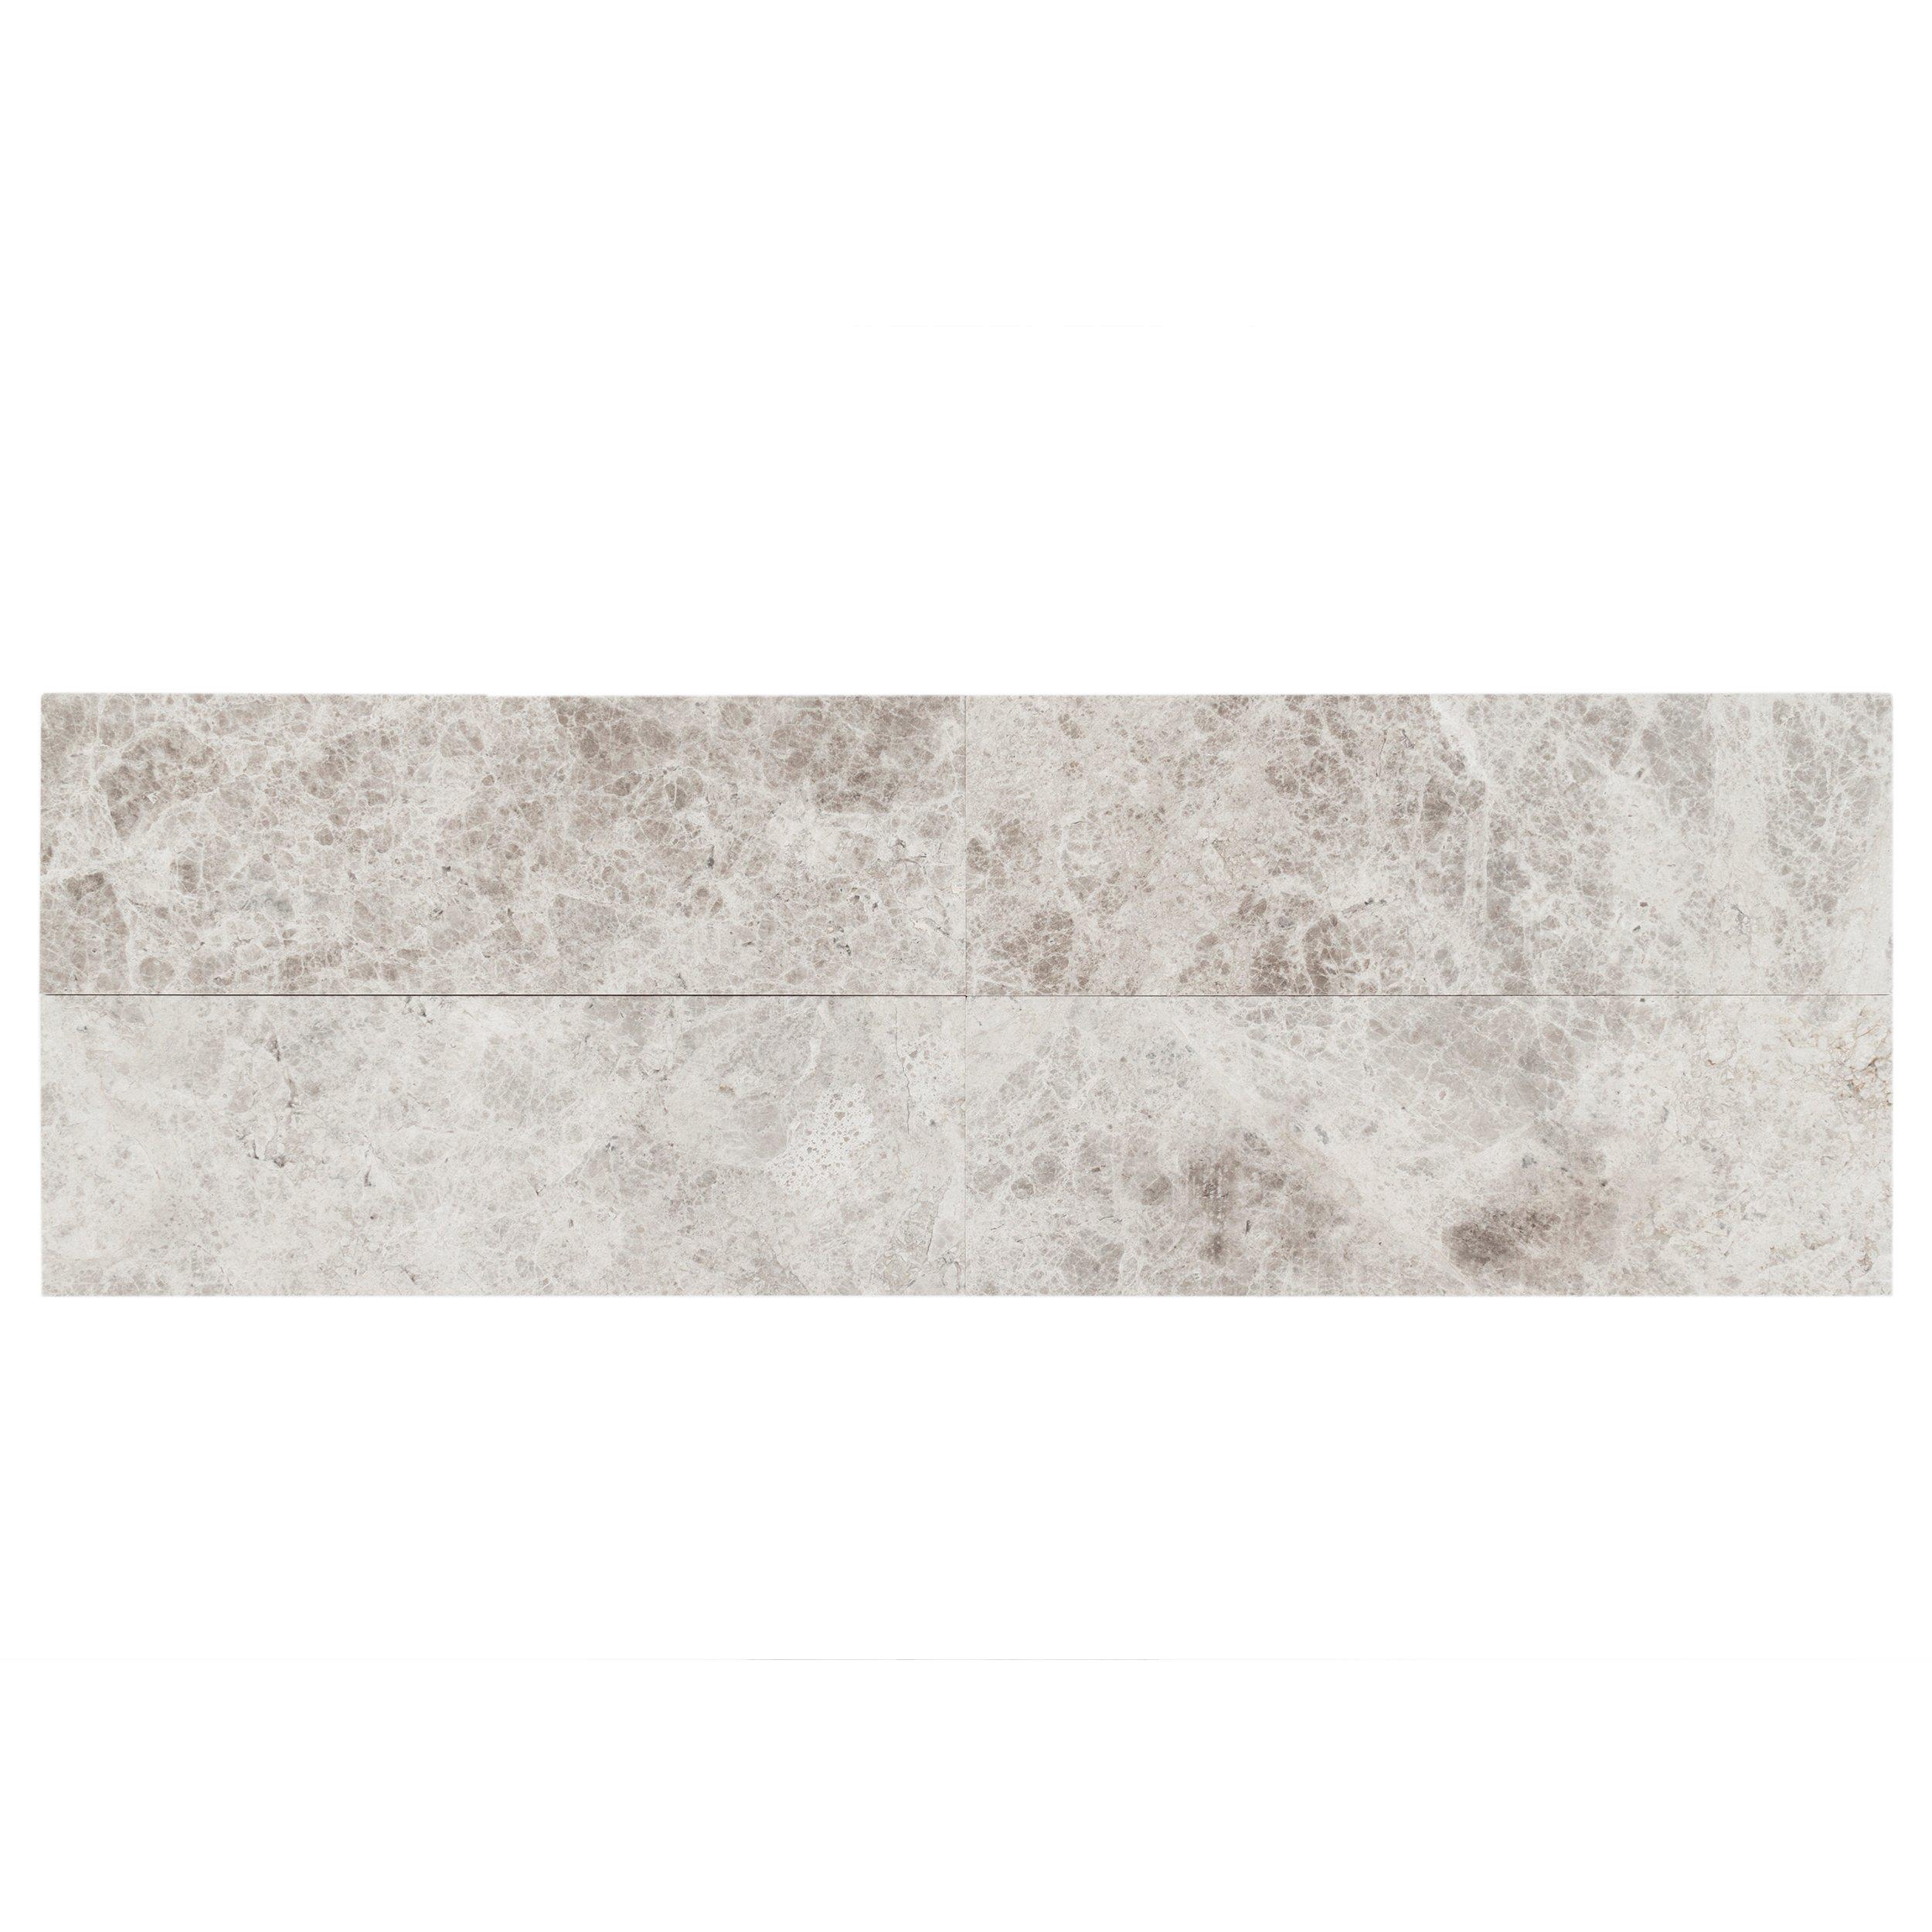 Silver Shadow Polished Marble Tile | Floor & Decor